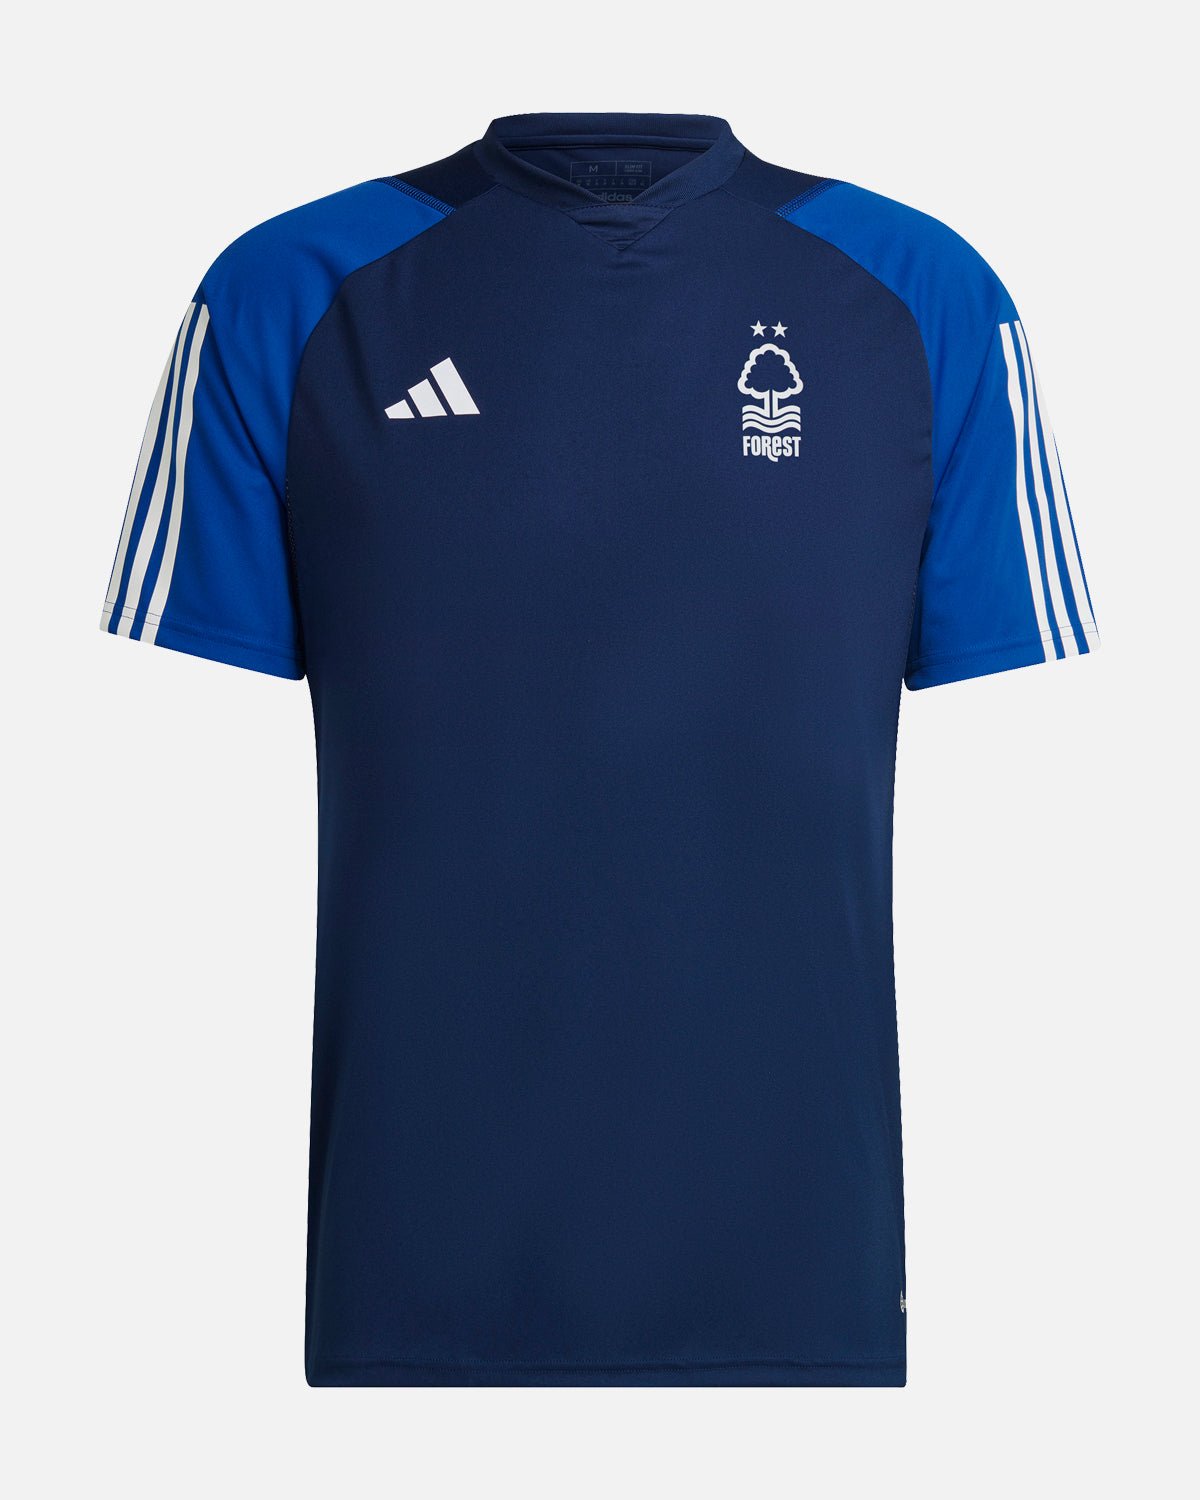 NFFC Navy Training Jersey 23-24 - Nottingham Forest FC